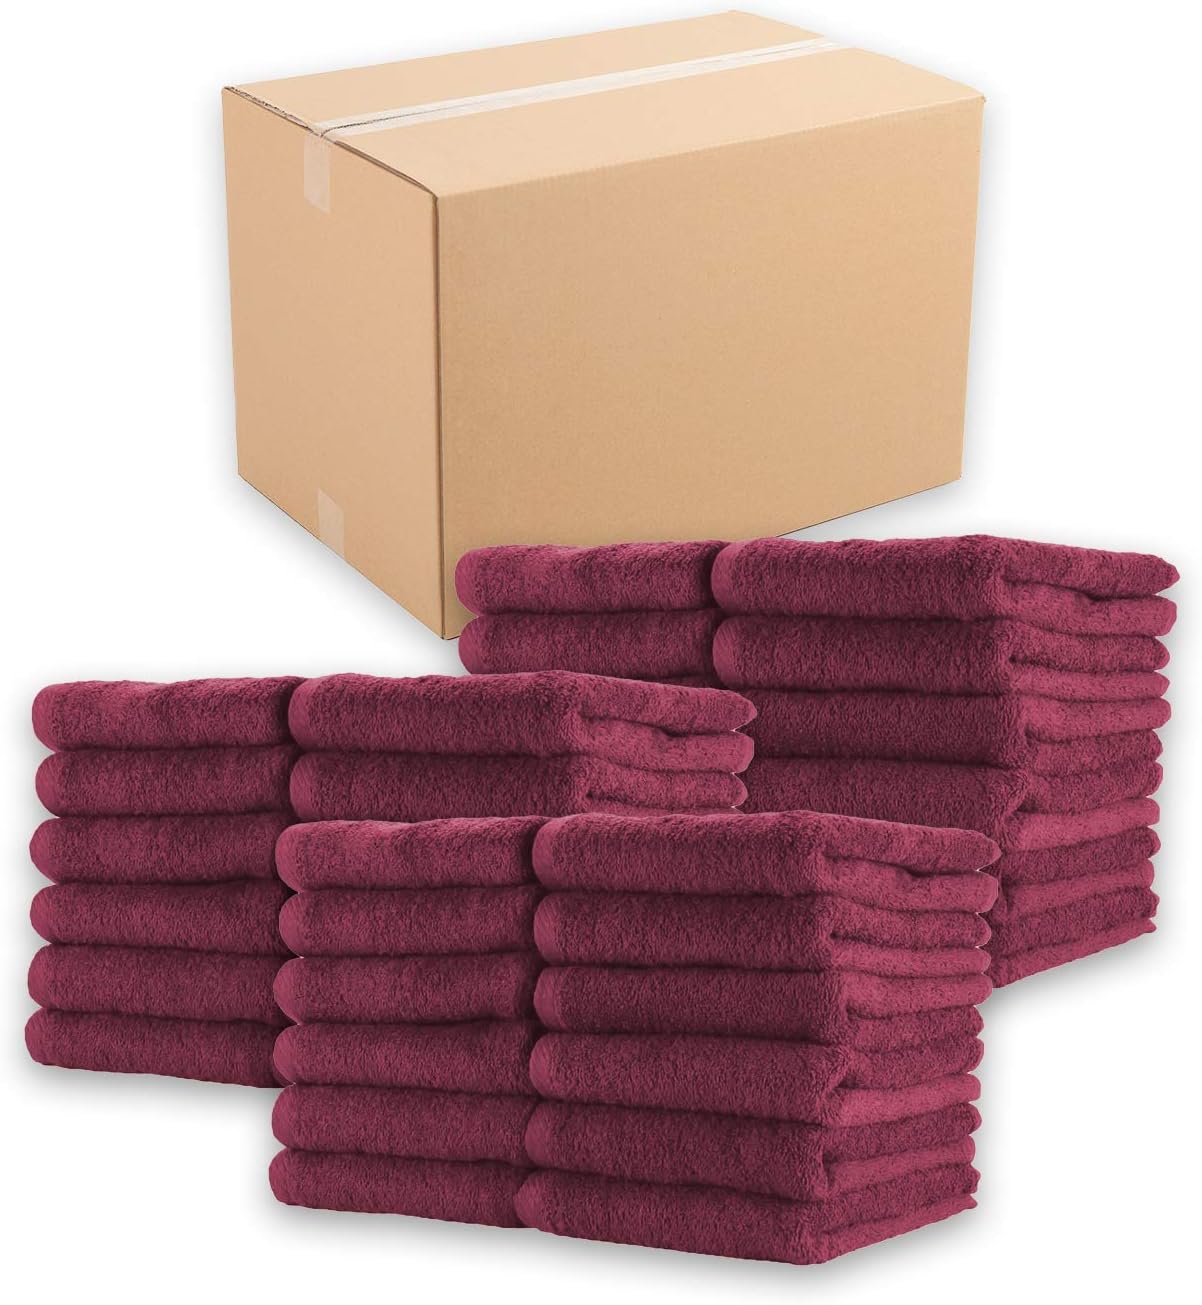 Arkwright Soft & Absorbent 100% Cotton Luxury Hand Towels (6 Pack or C